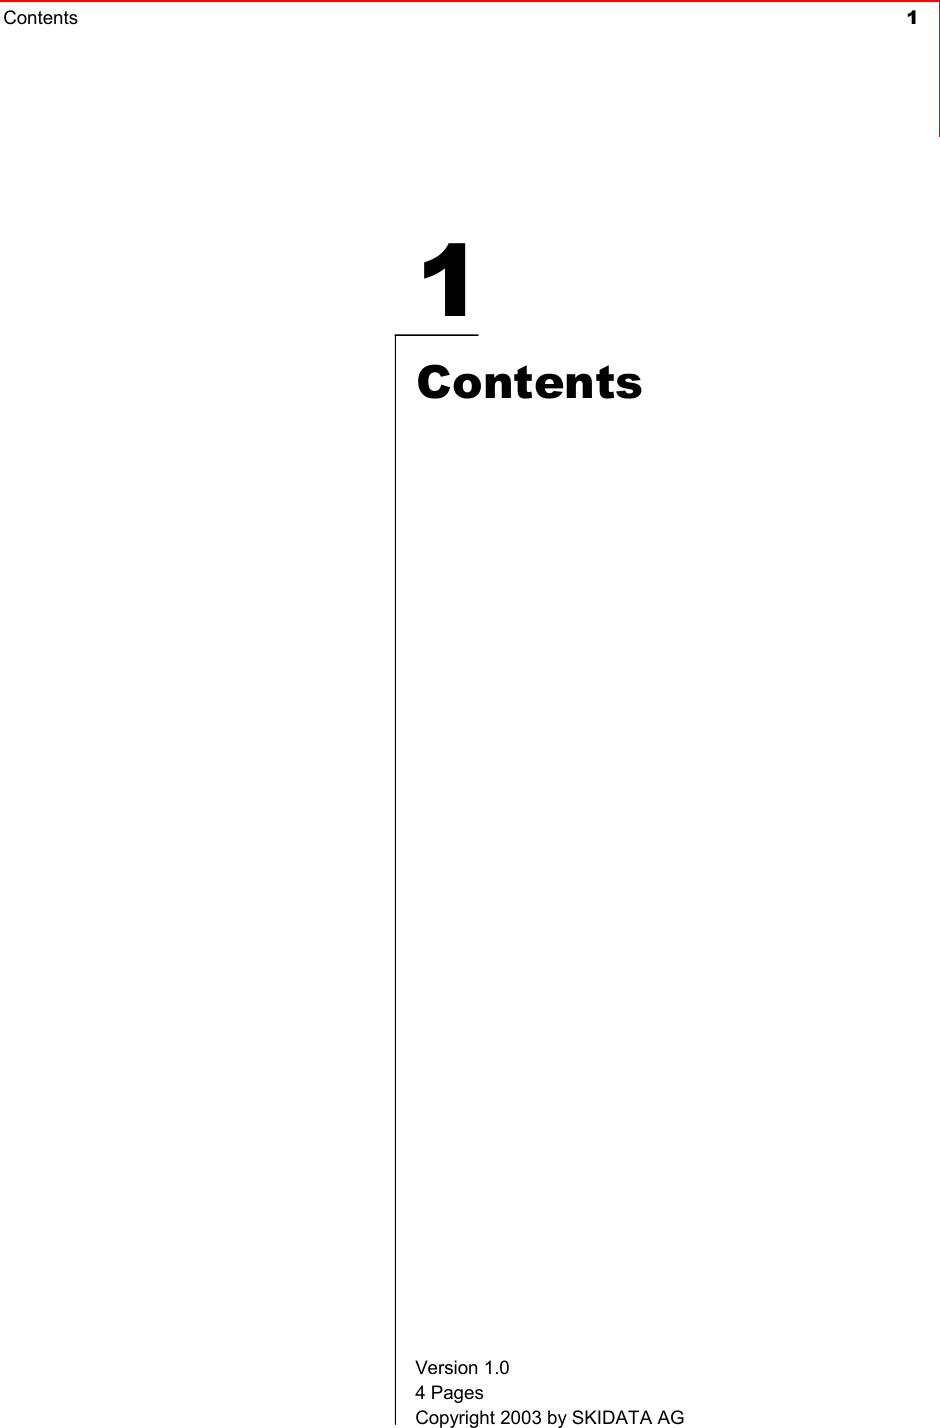 Contents 1     1  Contents  Version 1.0 4 Pages Copyright 2003 by SKIDATA AG 